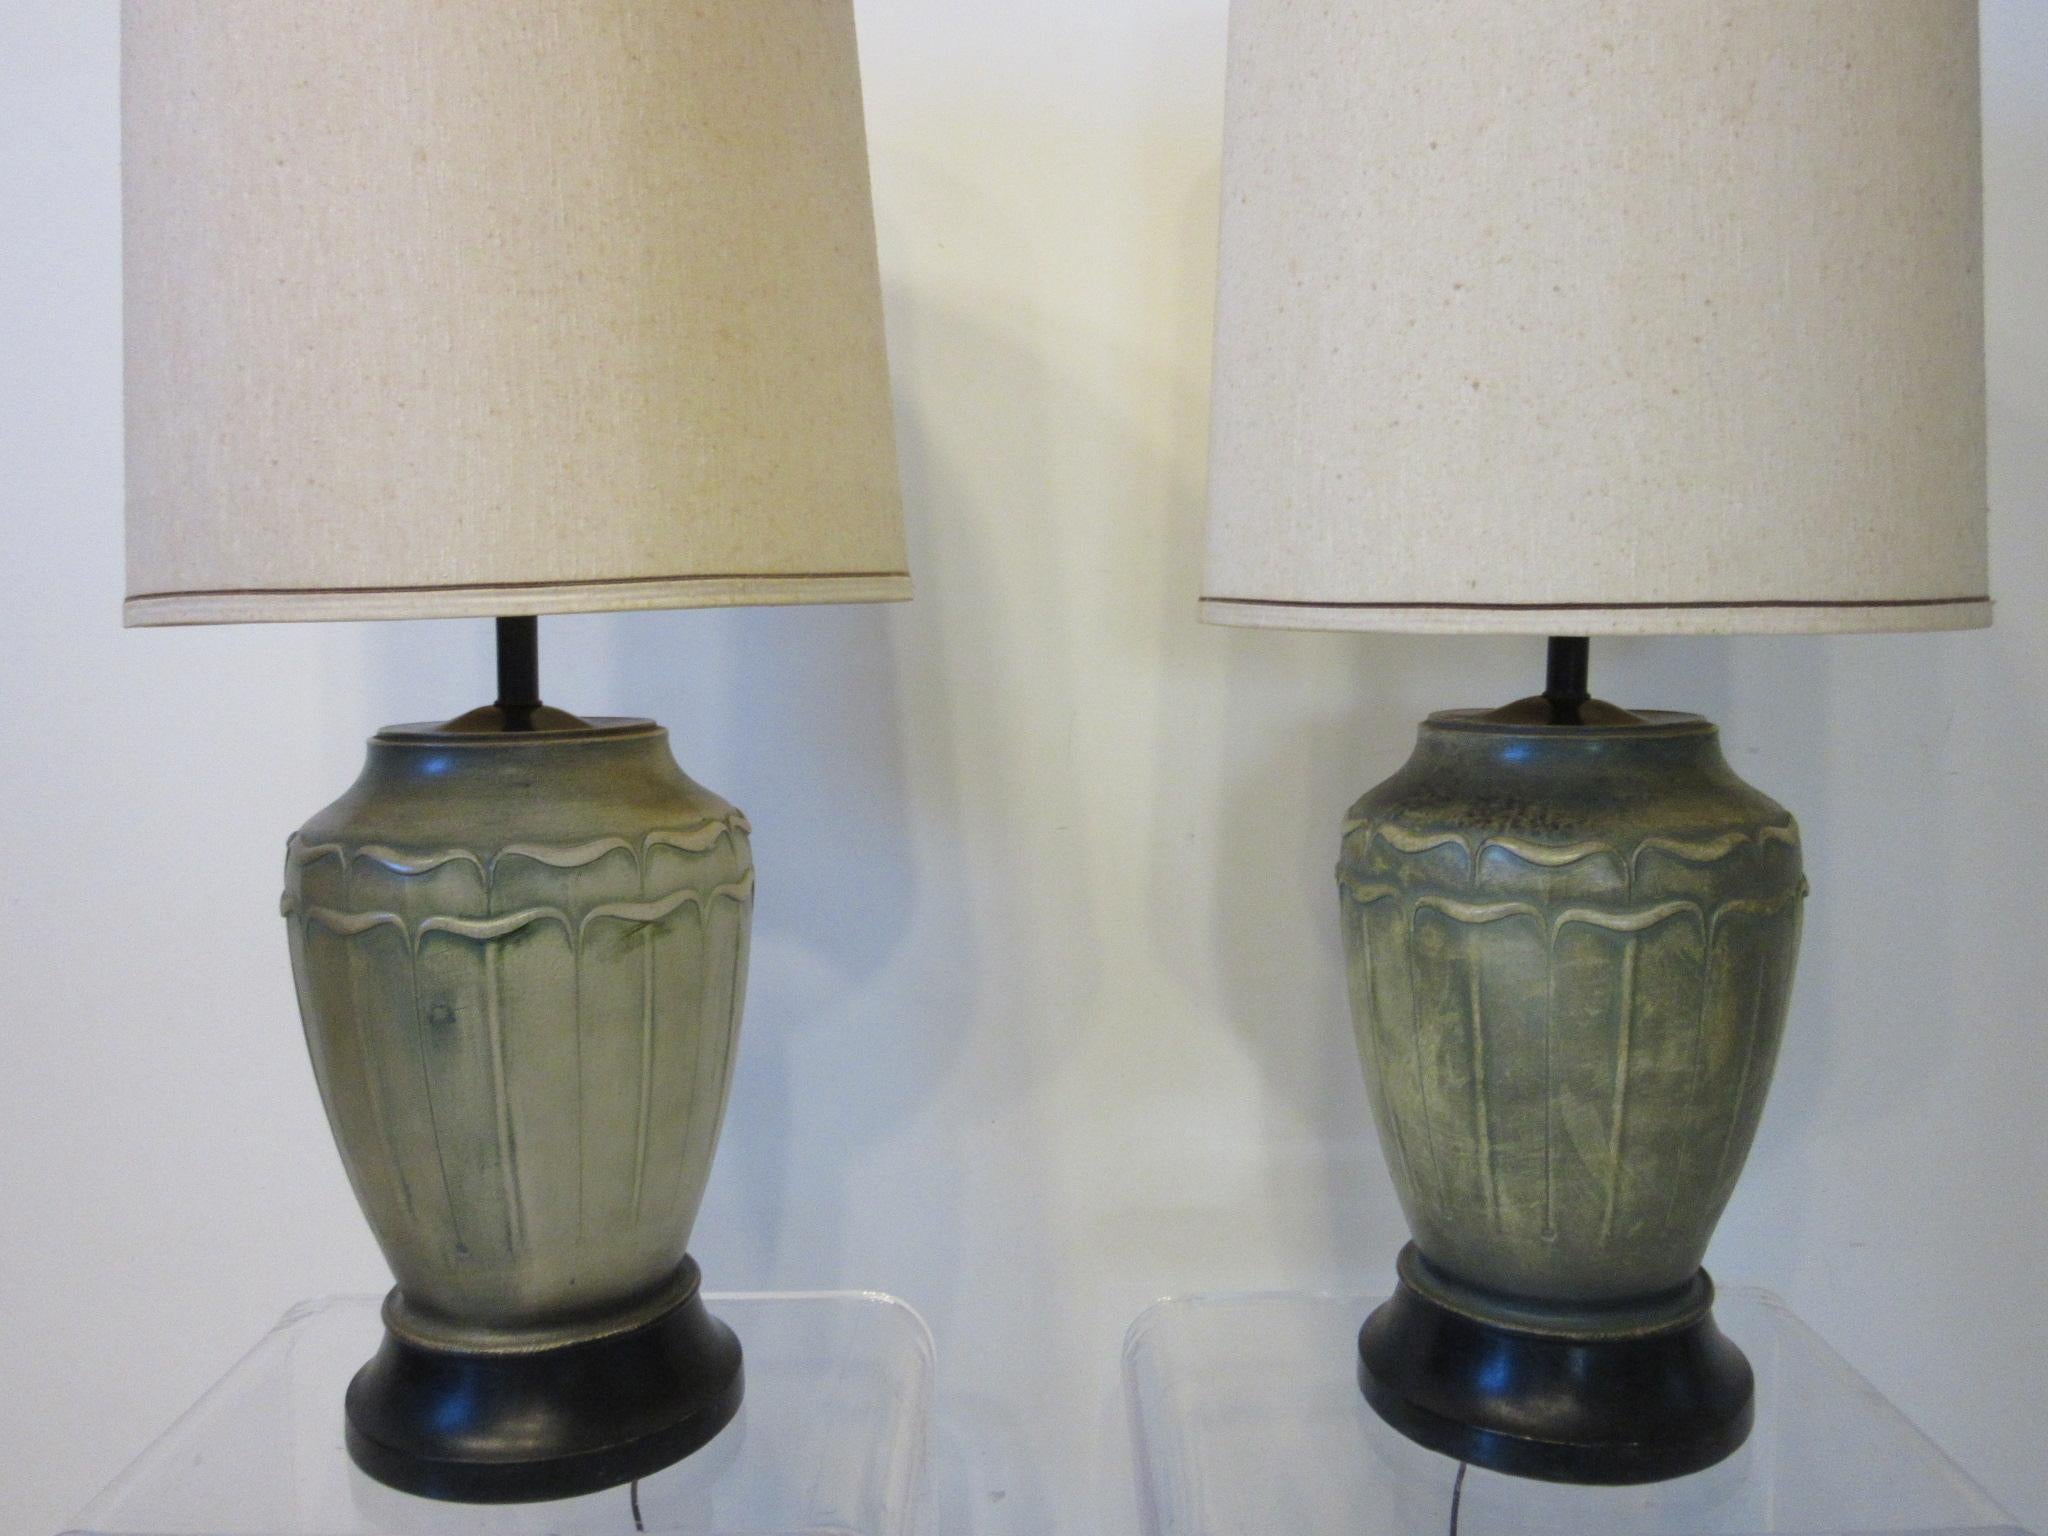 A pair of handmade cast plaster table lamps with glazed patina finish in a Arts & Crafts, Art Deco styled finish. Retains the original paper label to each piece by the Feldman Lamp company, Los Angeles California known for their high quality and